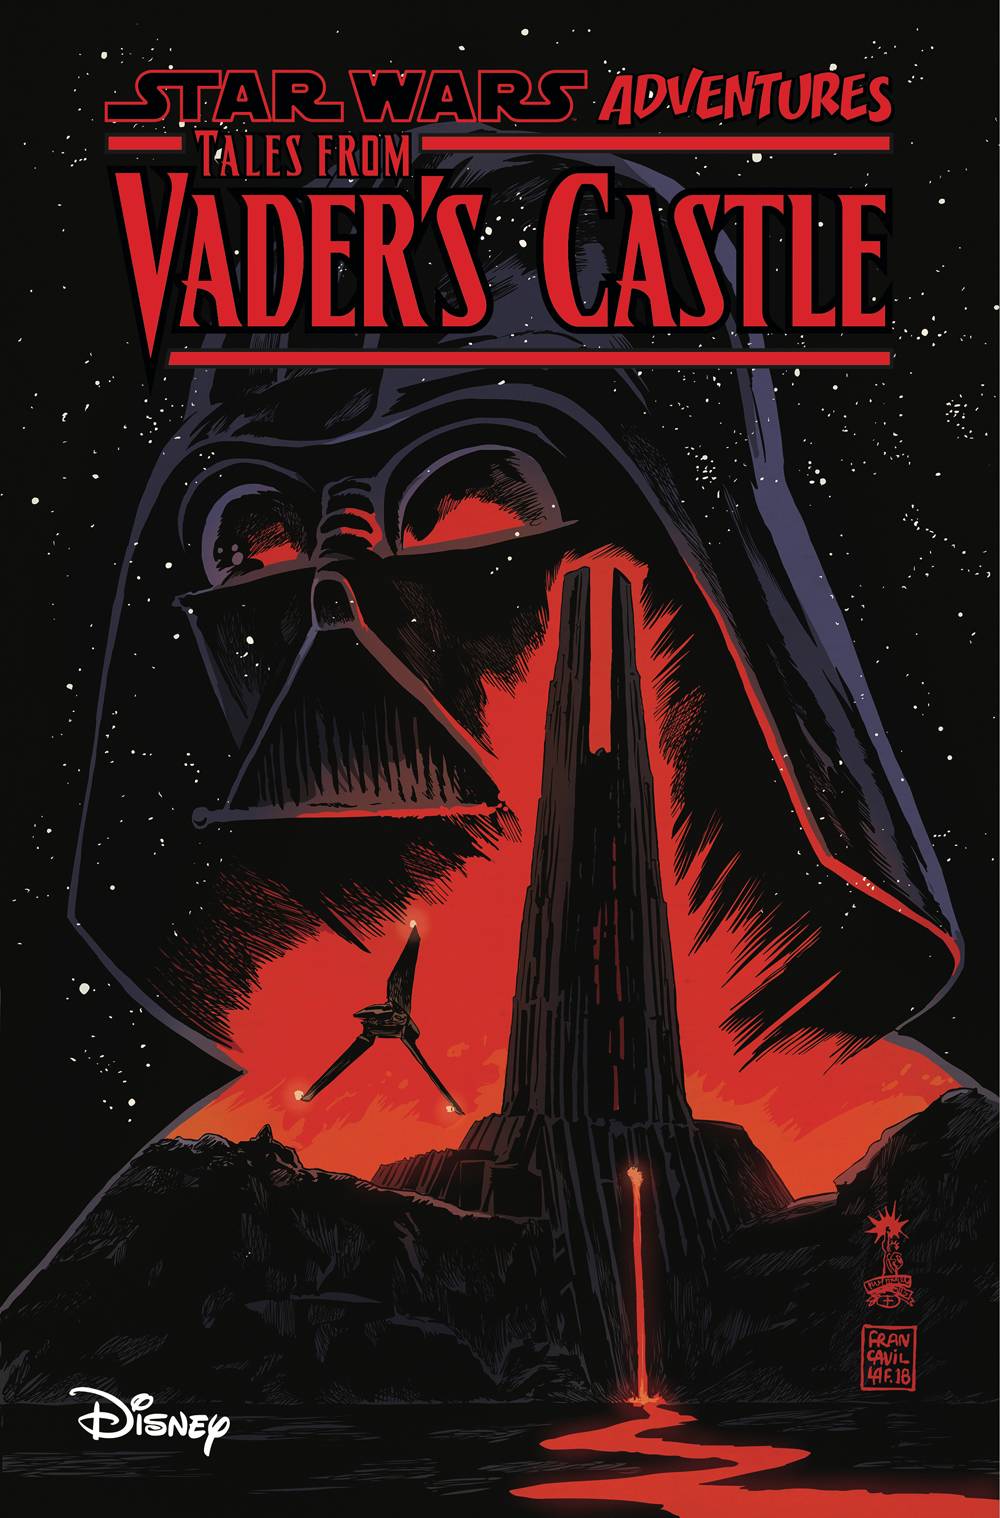 Star Wars Adventures Tales From Vader's Castle